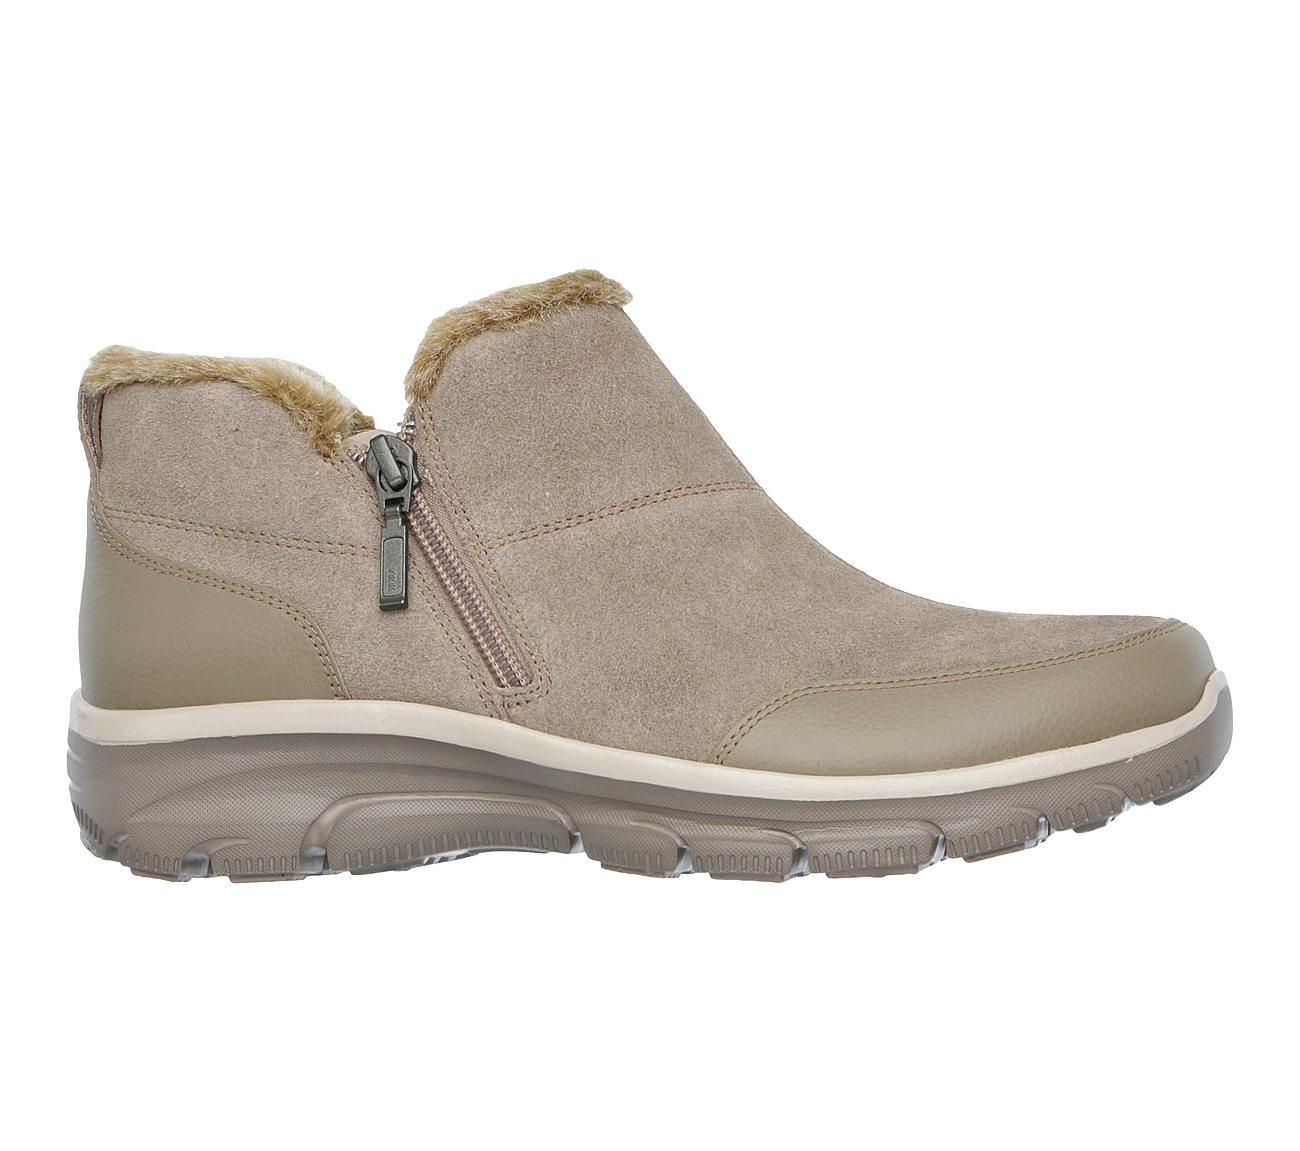 Buy SKECHERS Relaxed Fit: Easy Going - Zip It Modern Comfort Shoes